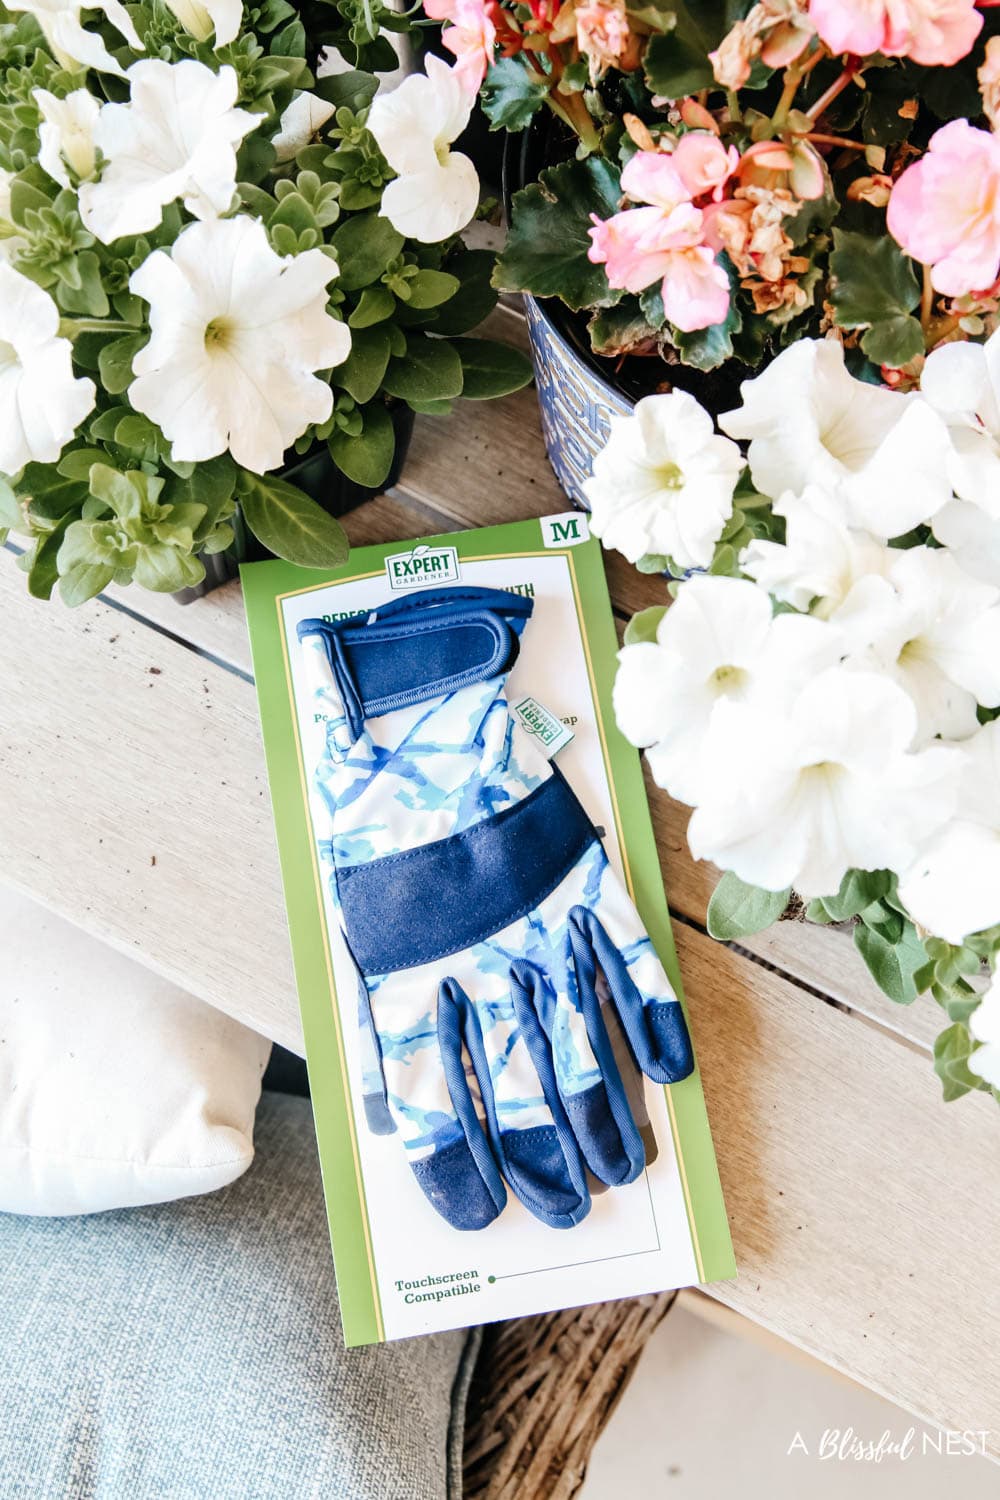 Blue and white gardening gloves next to plants to be planted